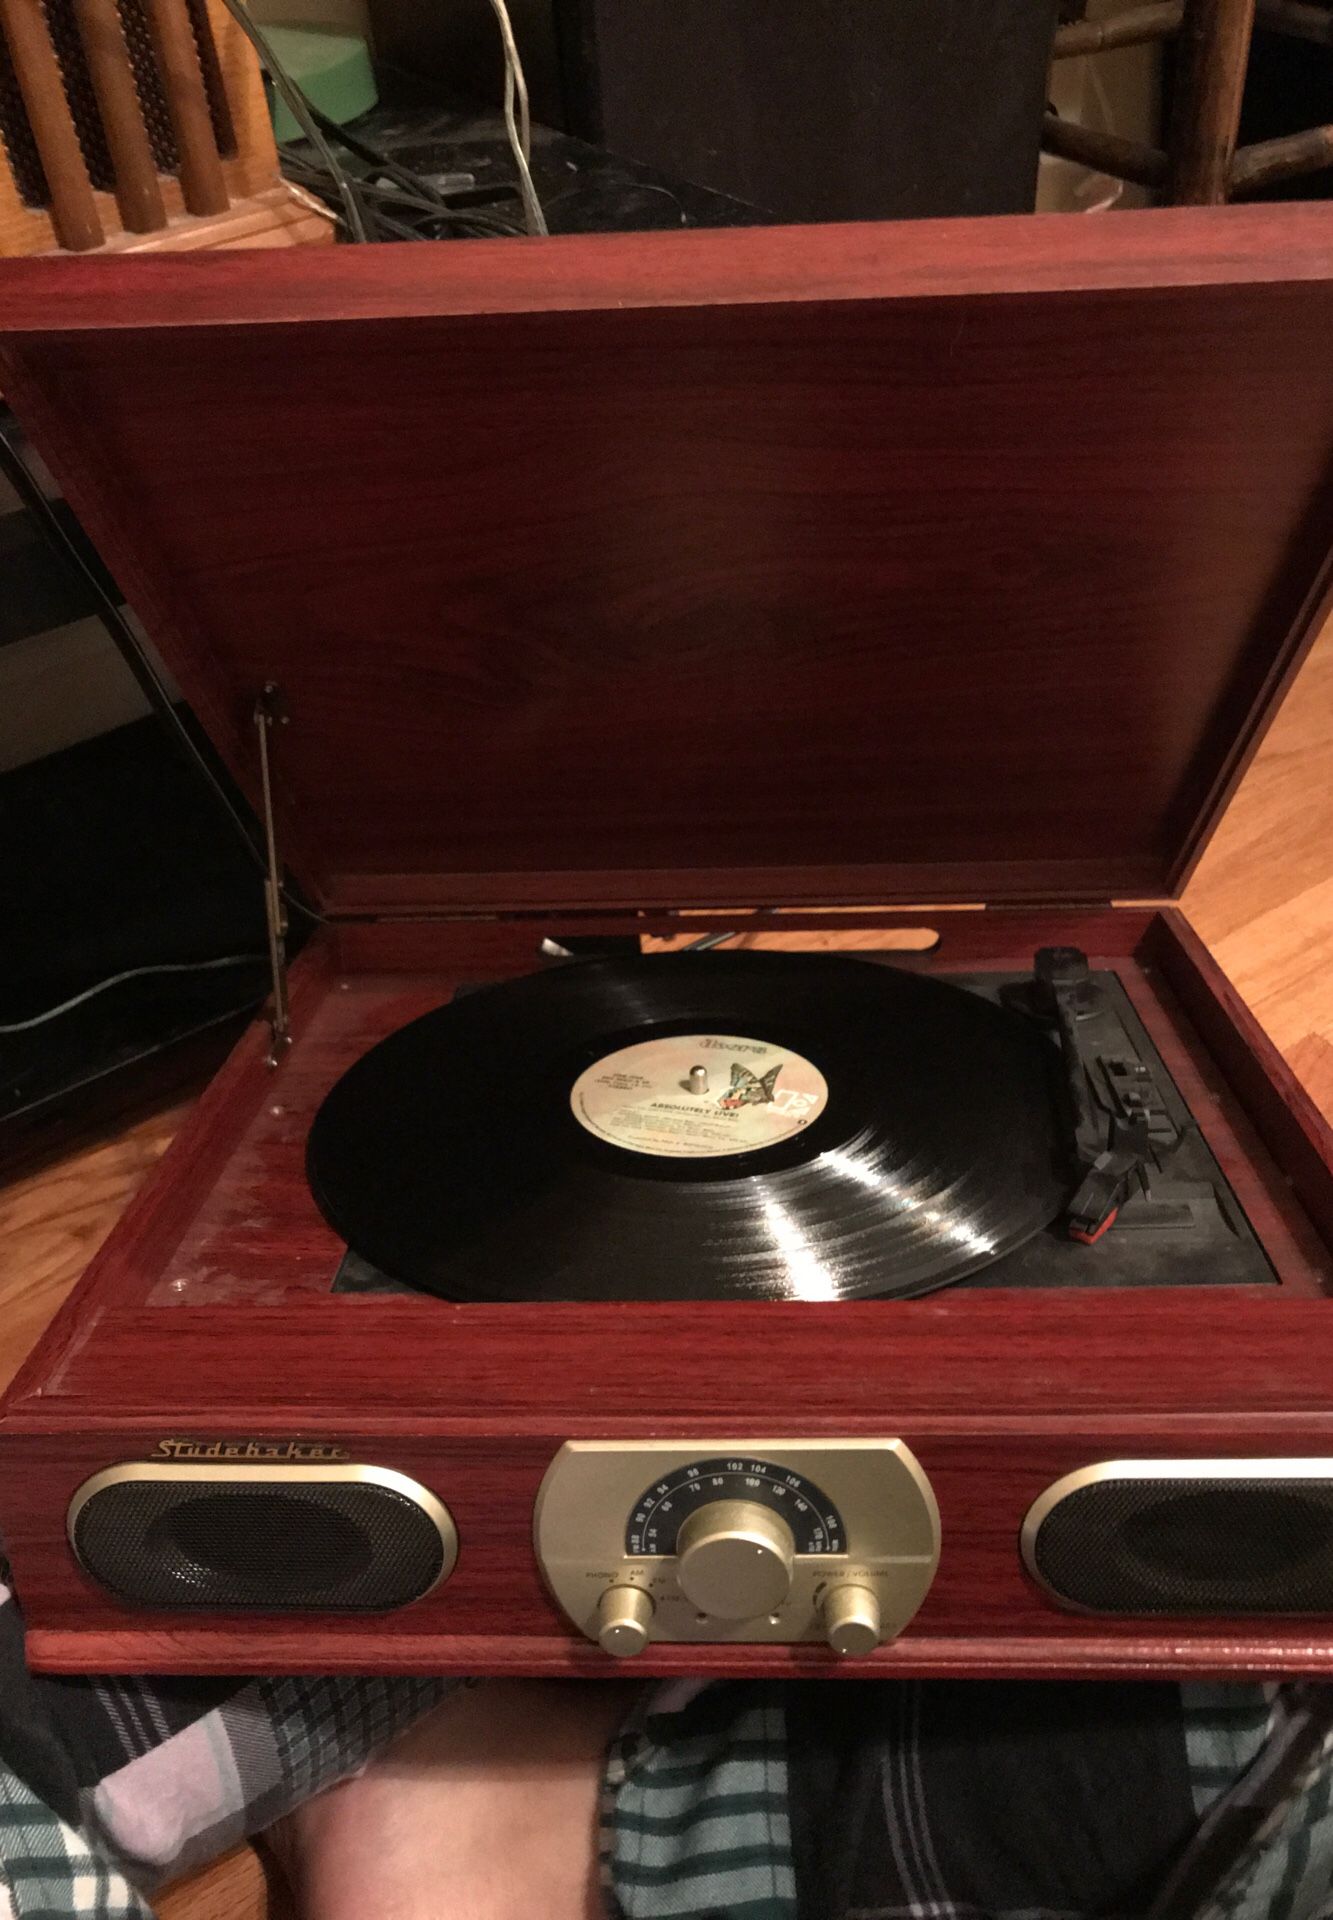 Studebaker turntable record player with amp